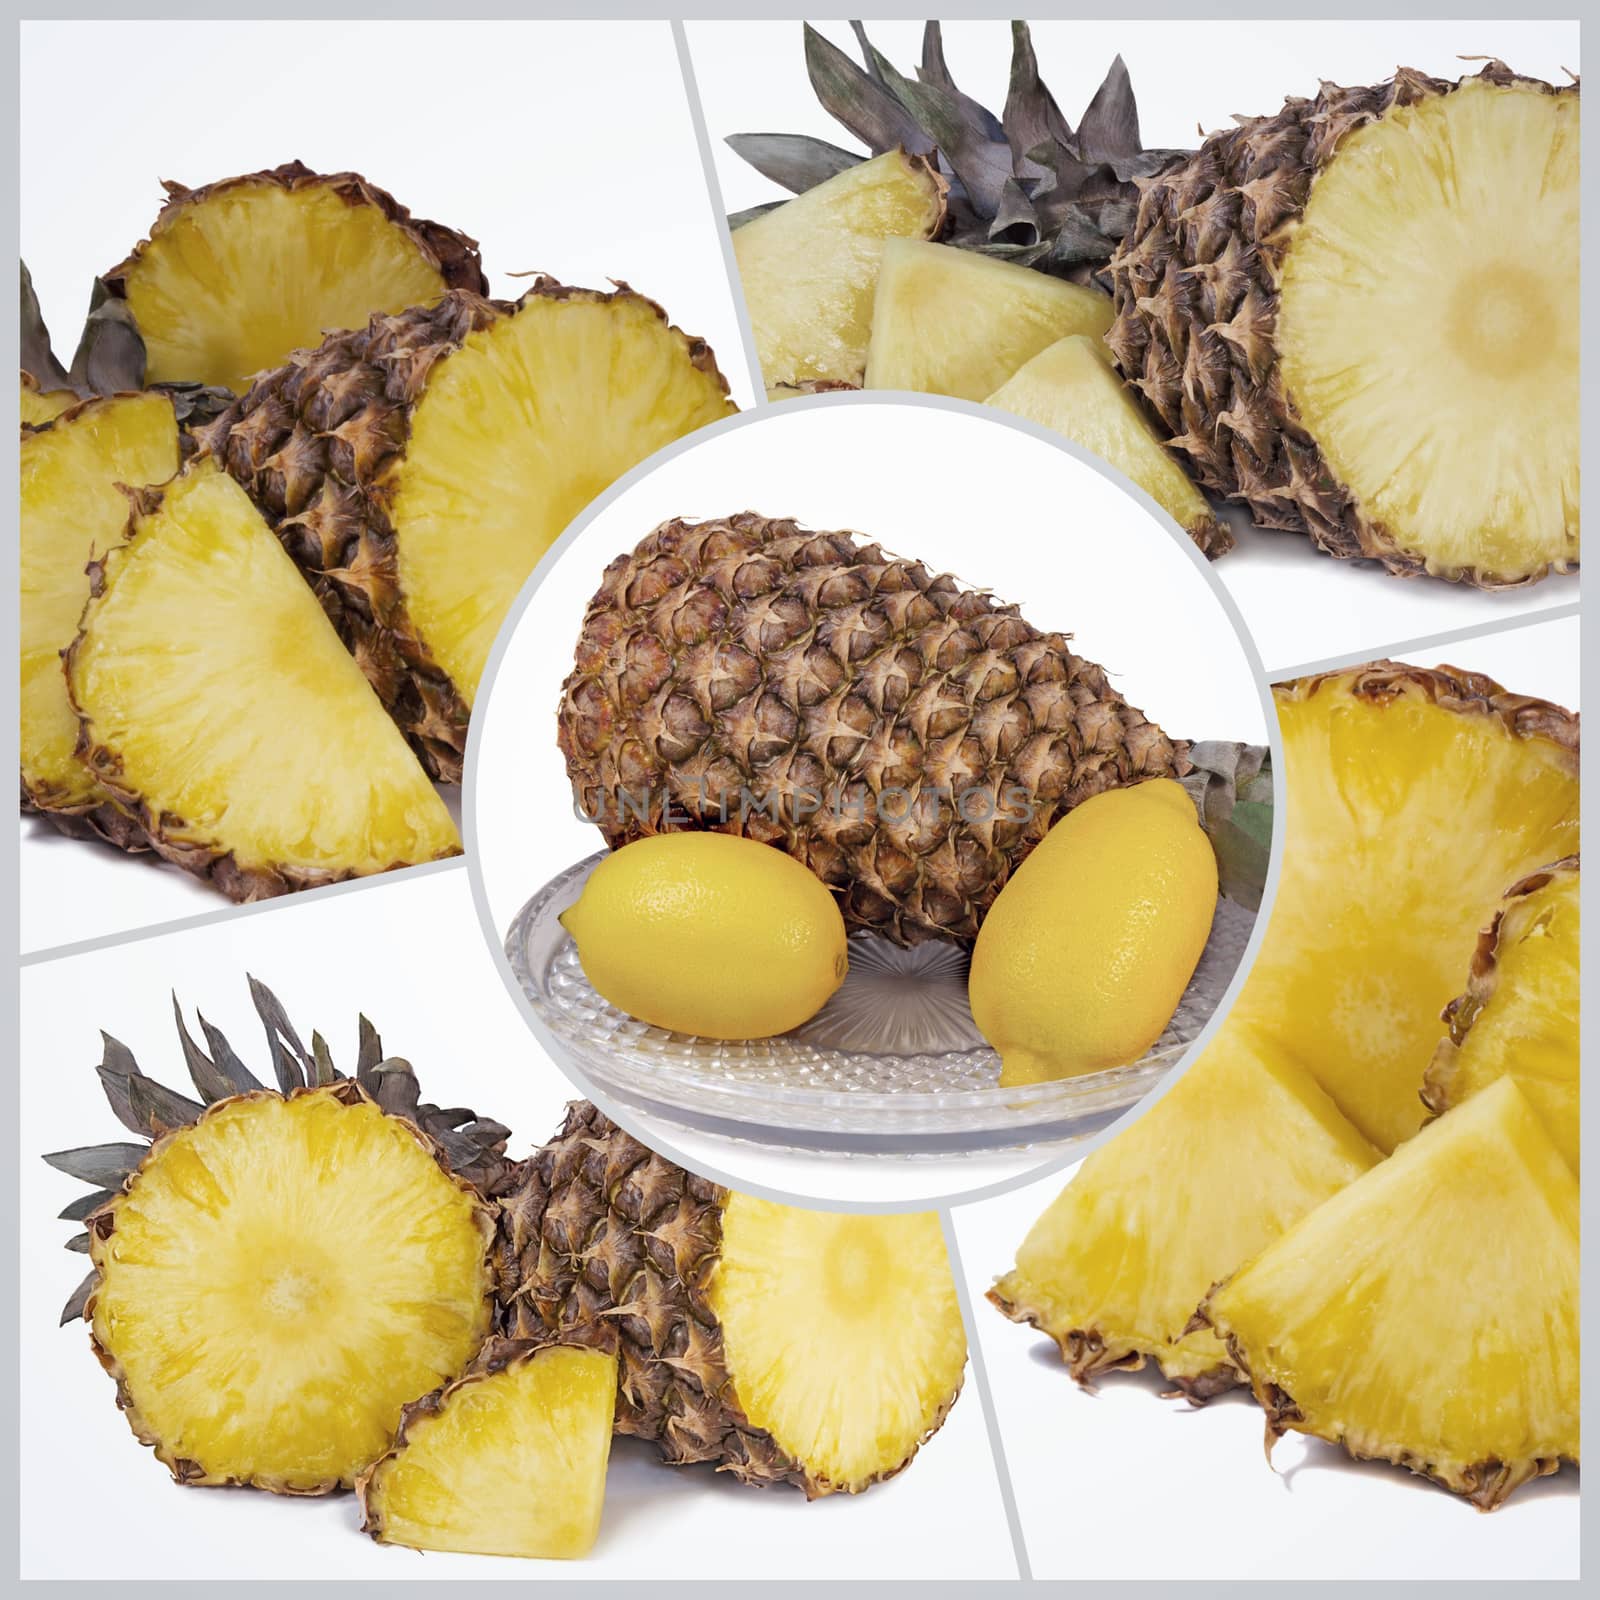 A collage of five photos depicting an entire pineapple and sliced pineapple on a white background. Presented close-up.